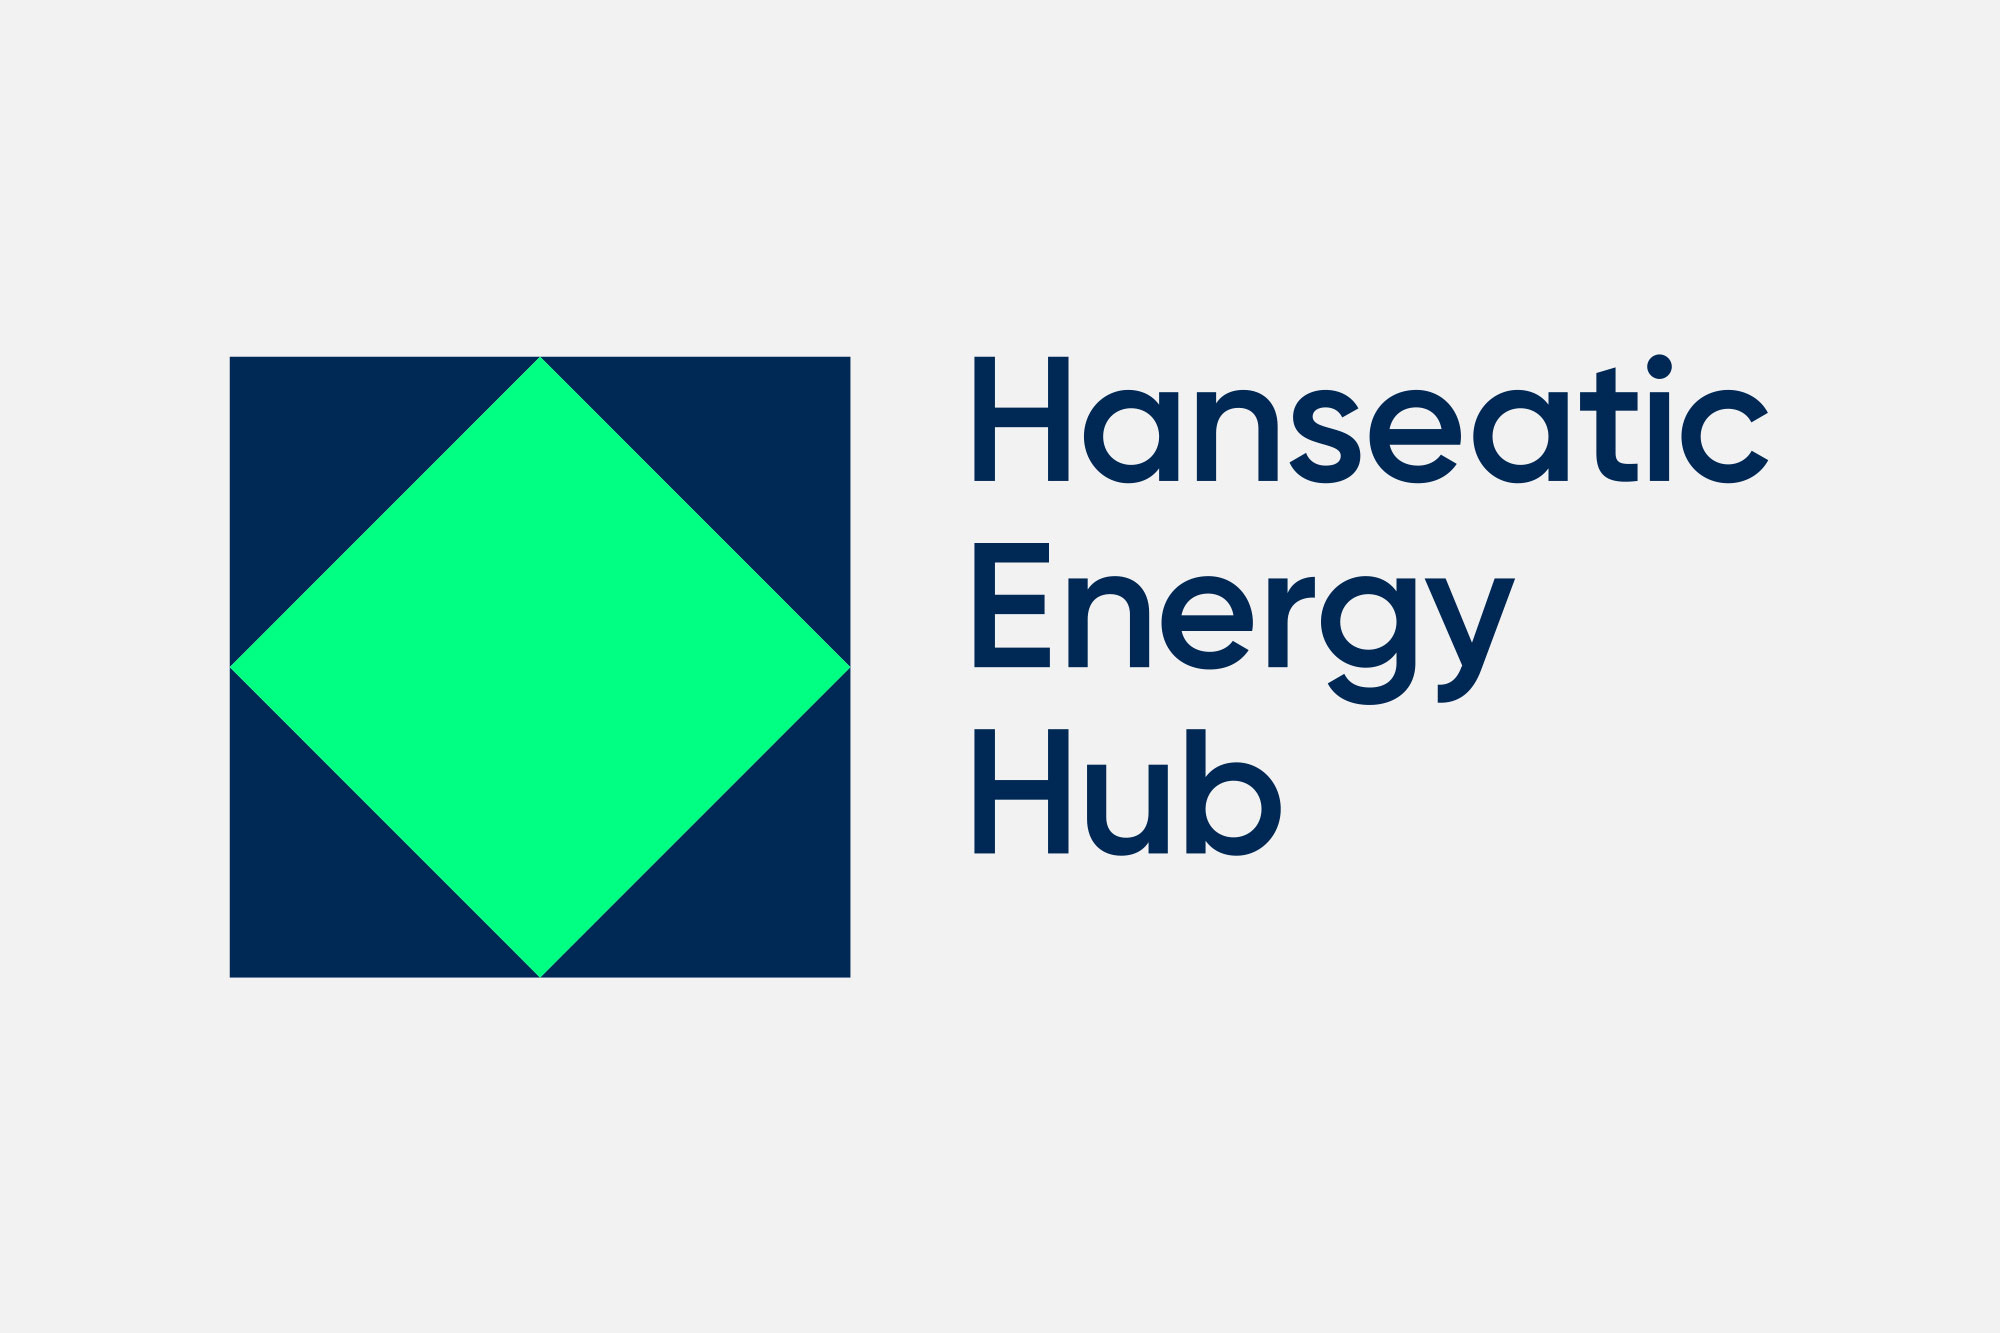 Hanseatic Energy Hub logo in dark blue and bright green on a gray background